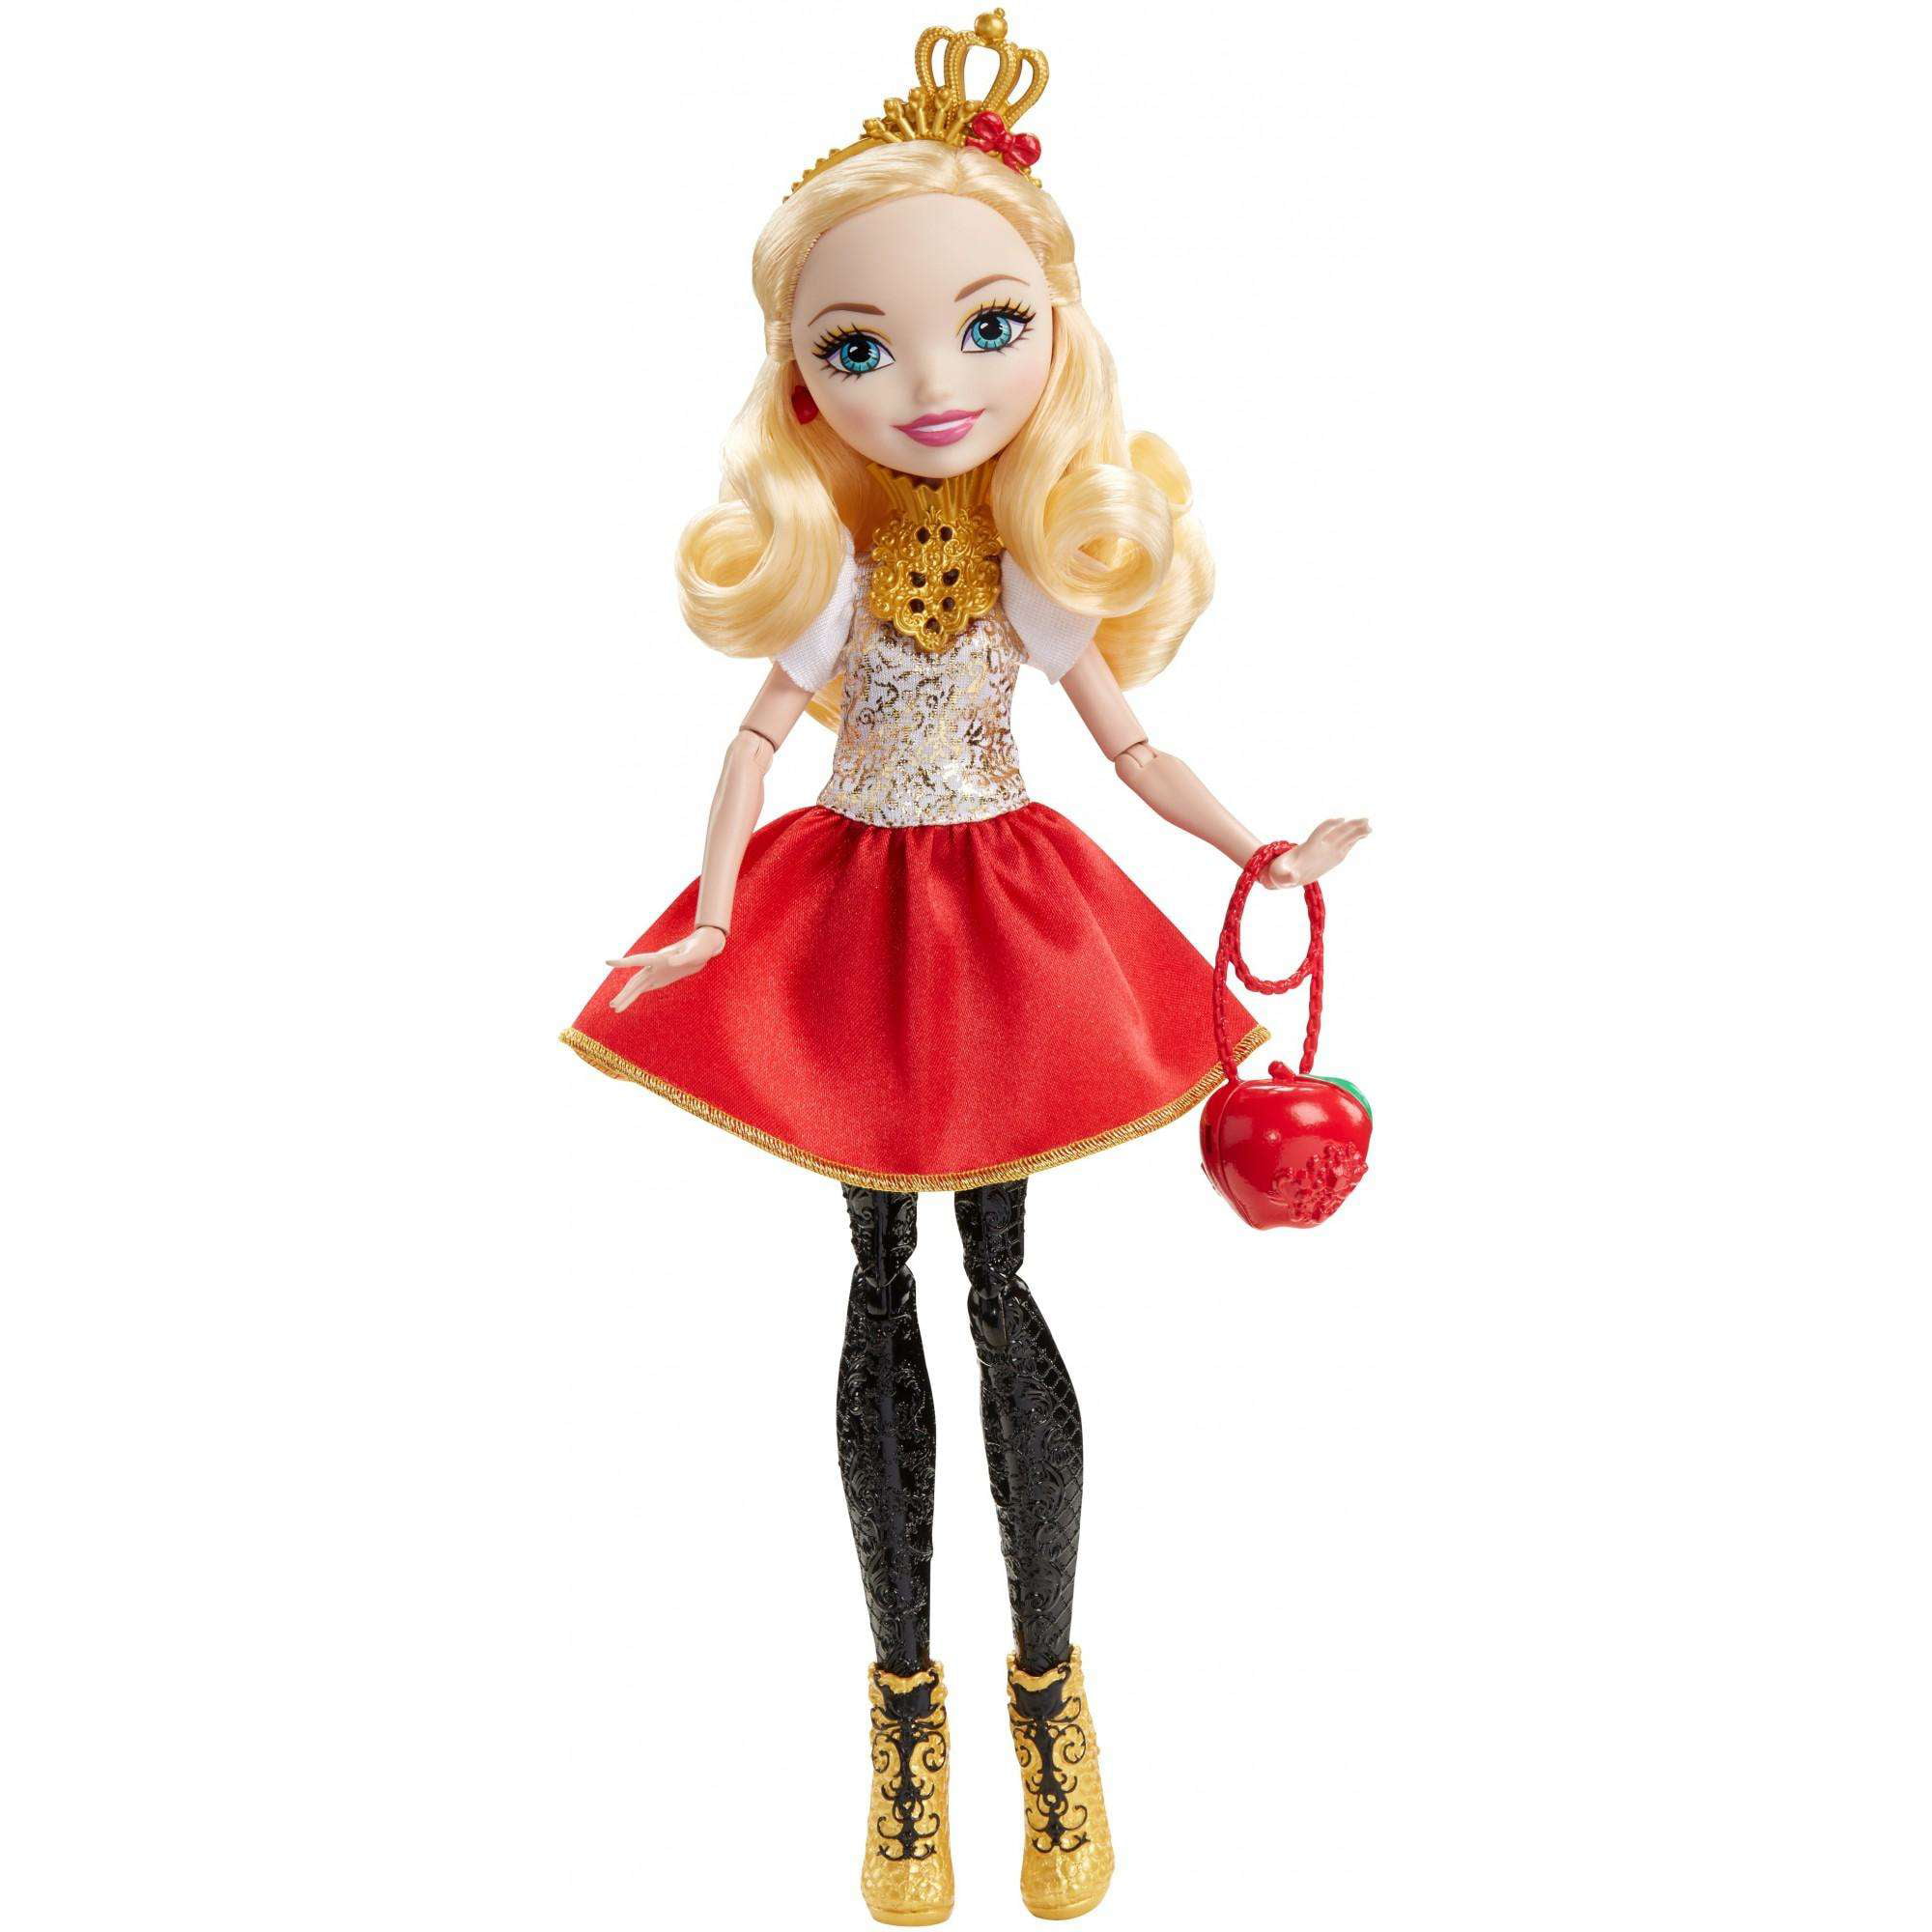 11.5 inch 28CM Ever After High Dolls Apple White Classic DIY Toys  brinquedos boneca with stand body removable gift - AliExpress